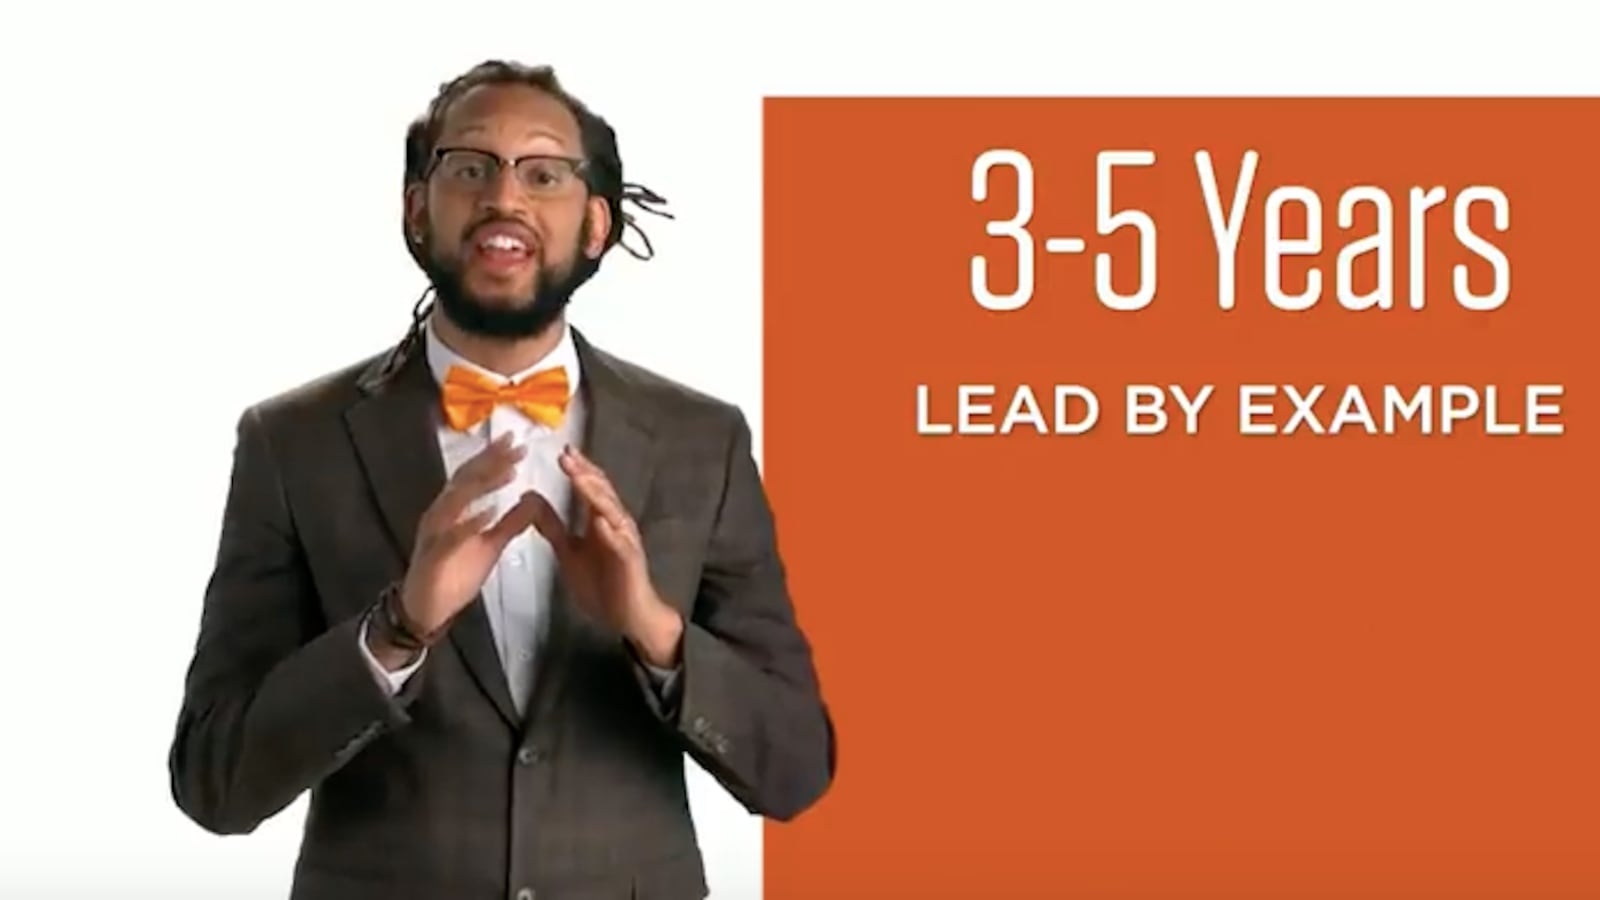 Stephen Brackett, a lead vocalist for the Denver hip-hop group Flobots, appears in a set of state videos about early learning.